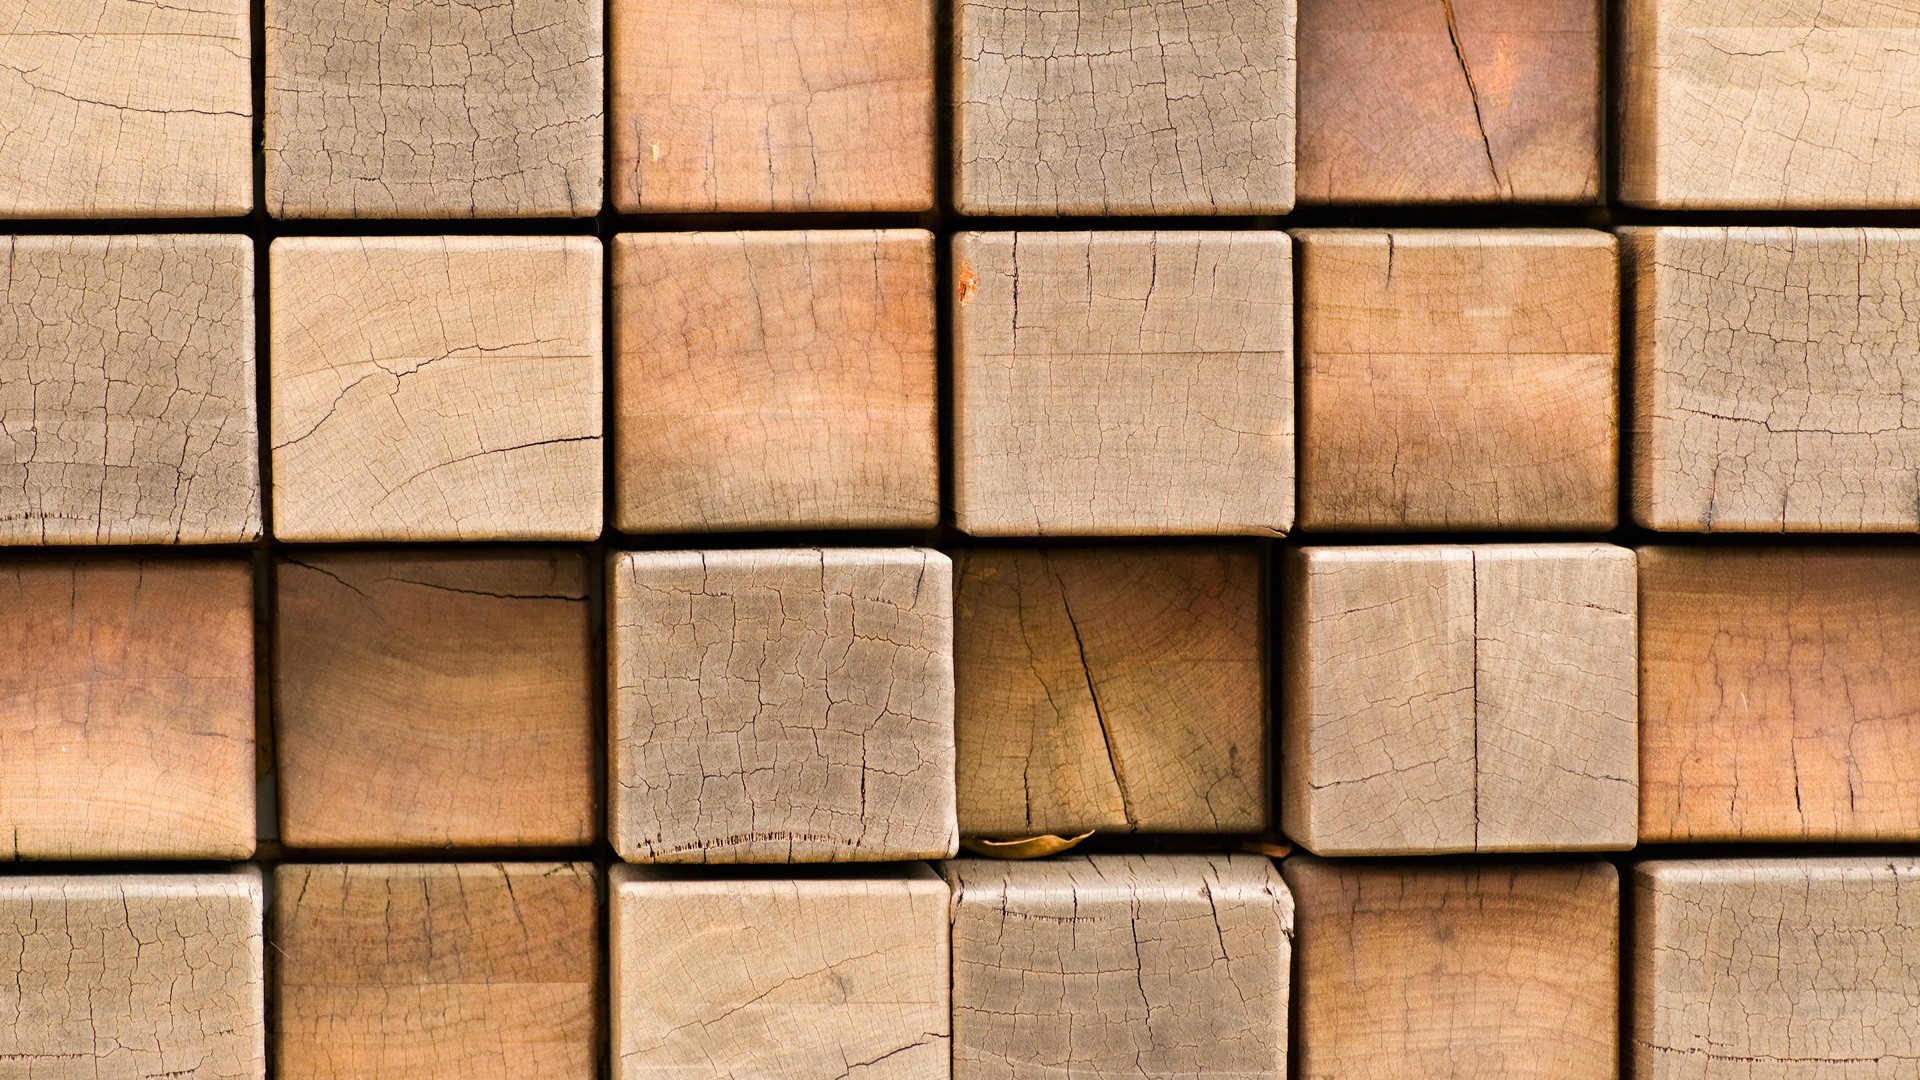 General 1920x1080 wood cube collections minimalism beige 3D Blocks texture wooden surface